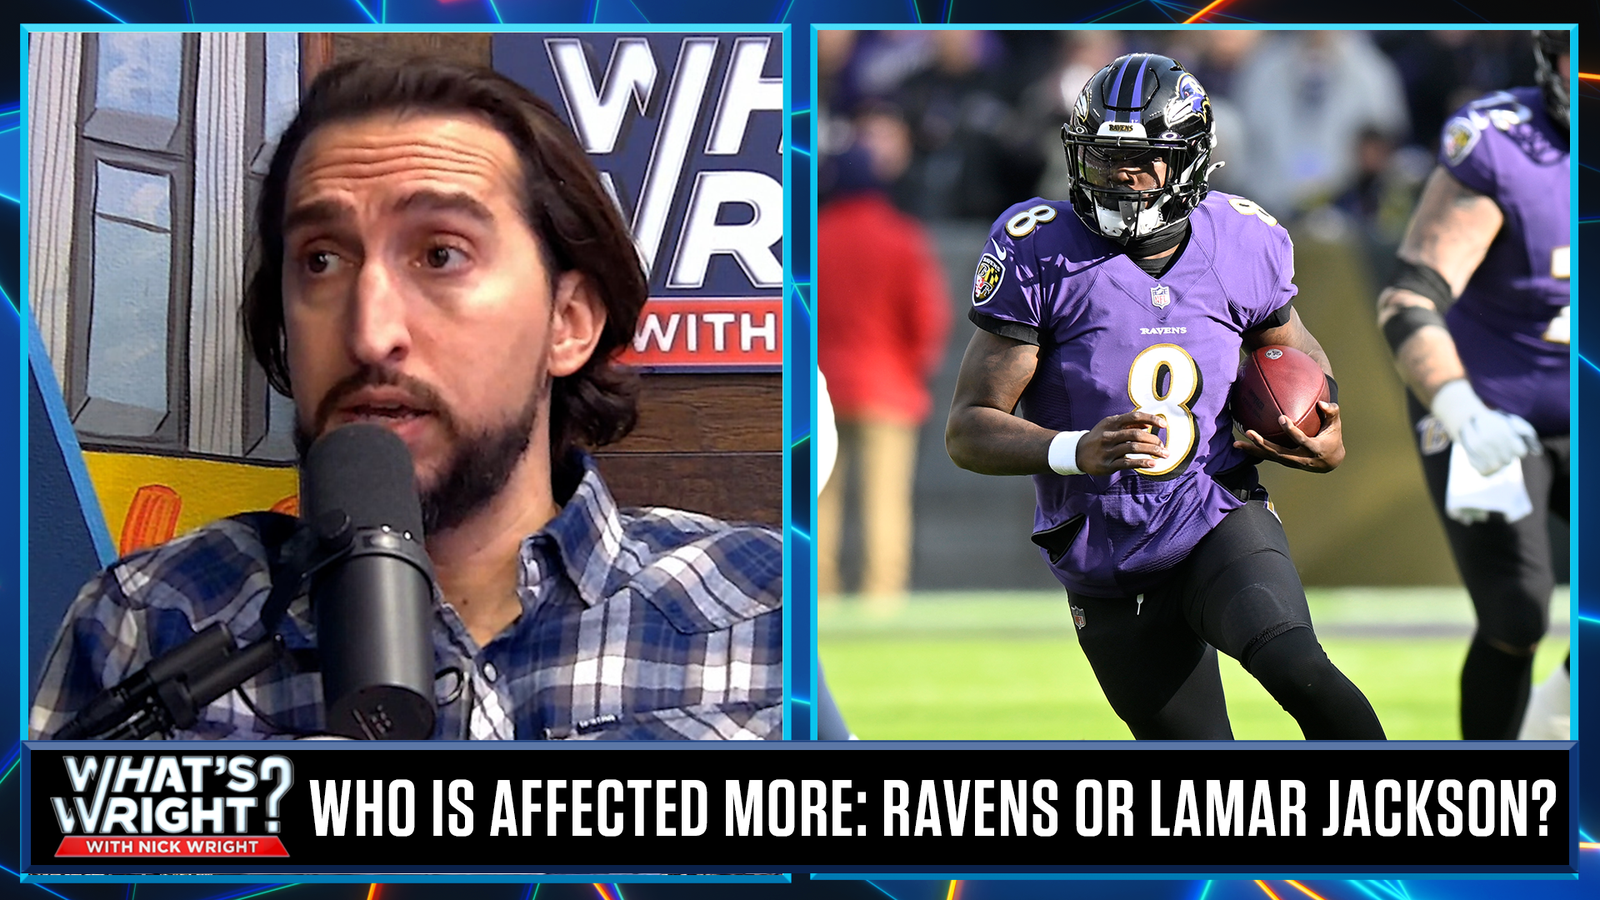 Watch Nick Wright explain why Lamar Jackson's injury was more devastating to Raven than Lamar despite his ongoing contract issues.